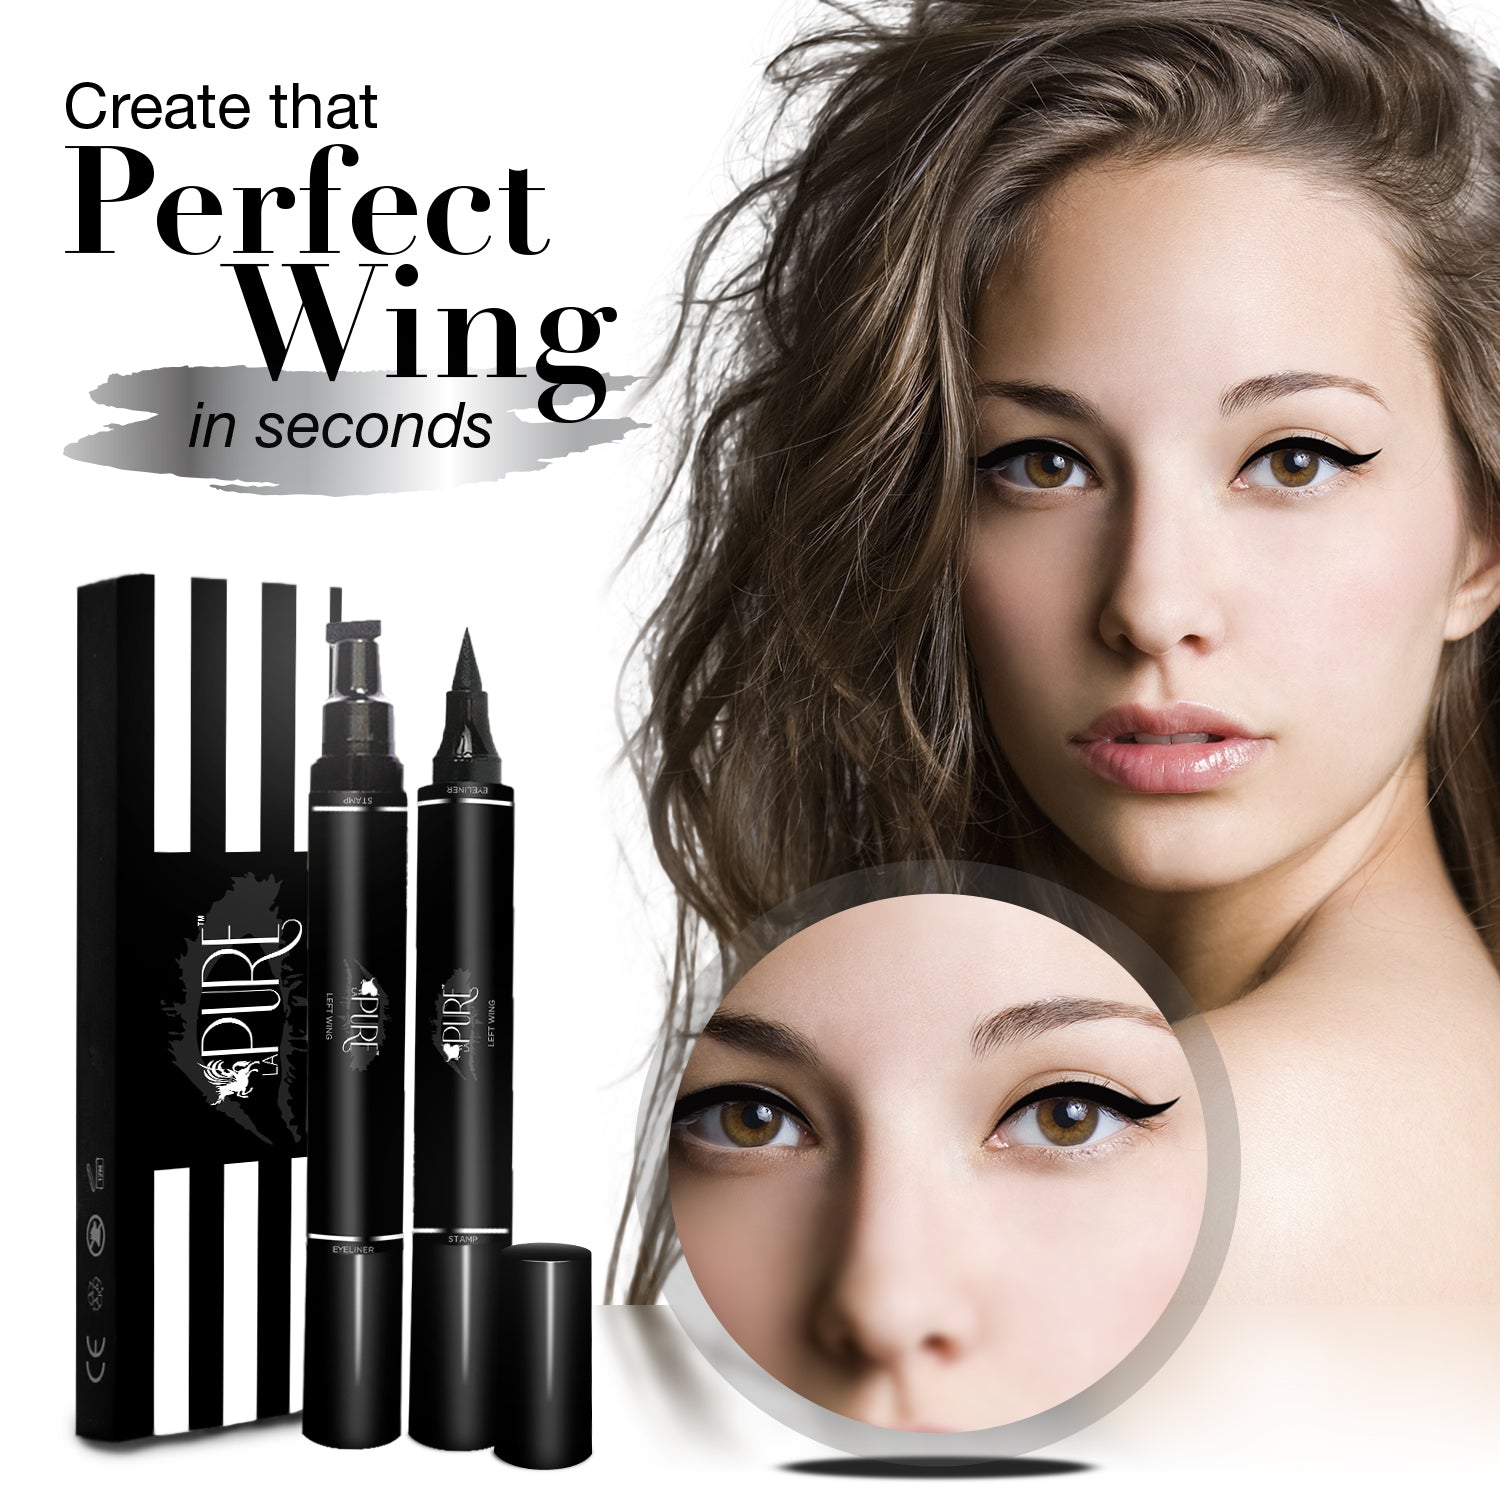 Create the perfect wing in seconds